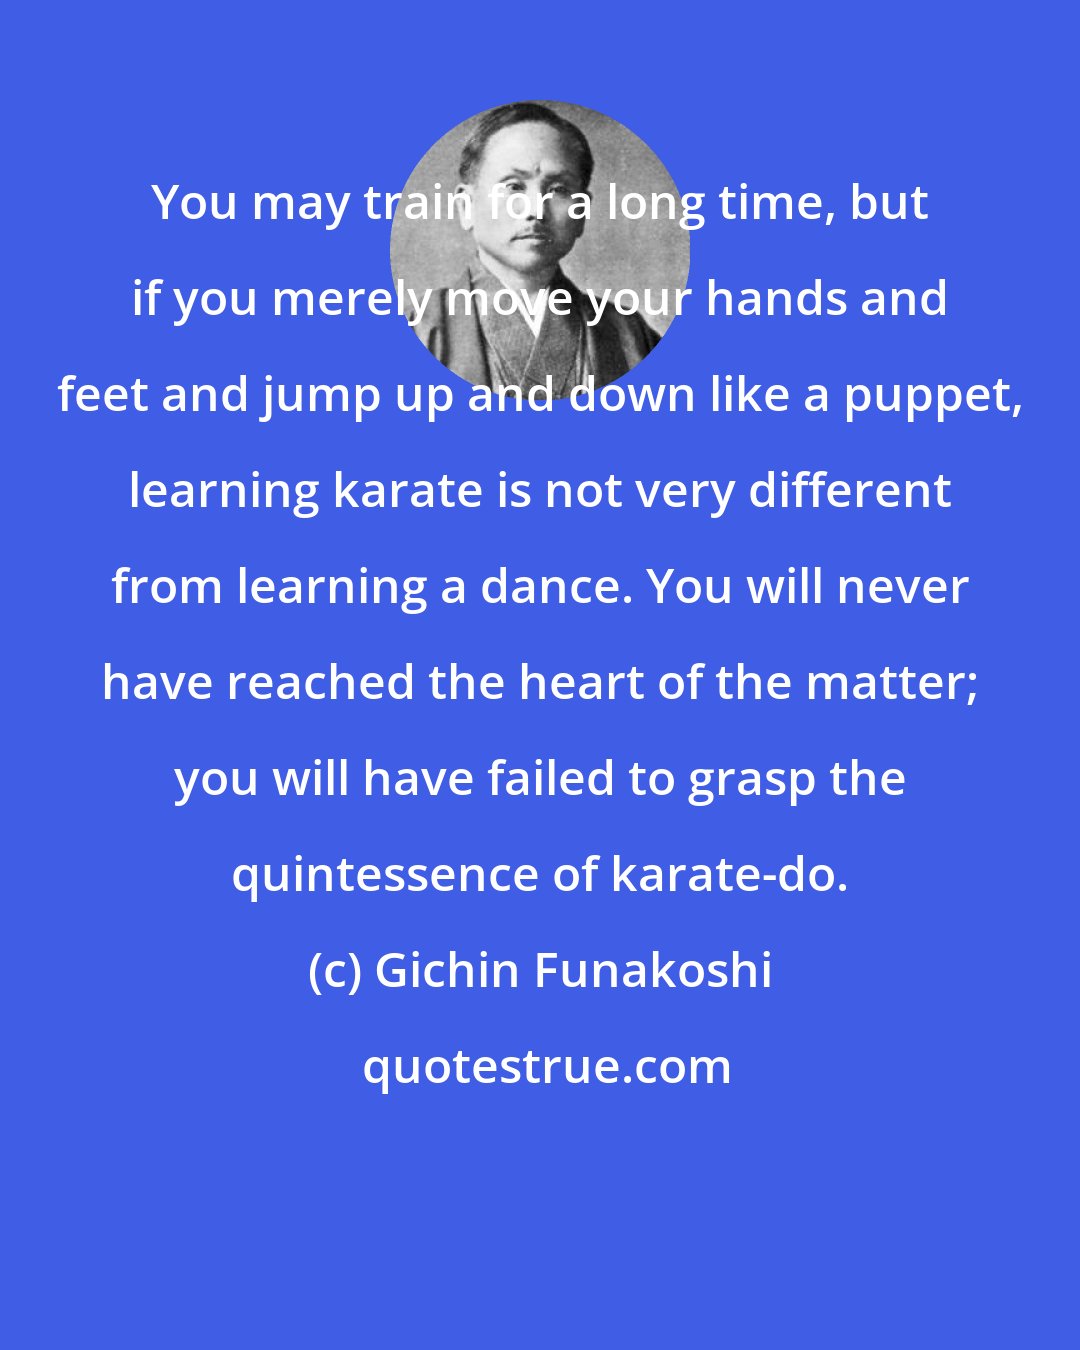 Gichin Funakoshi: You may train for a long time, but if you merely move your hands and feet and jump up and down like a puppet, learning karate is not very different from learning a dance. You will never have reached the heart of the matter; you will have failed to grasp the quintessence of karate-do.